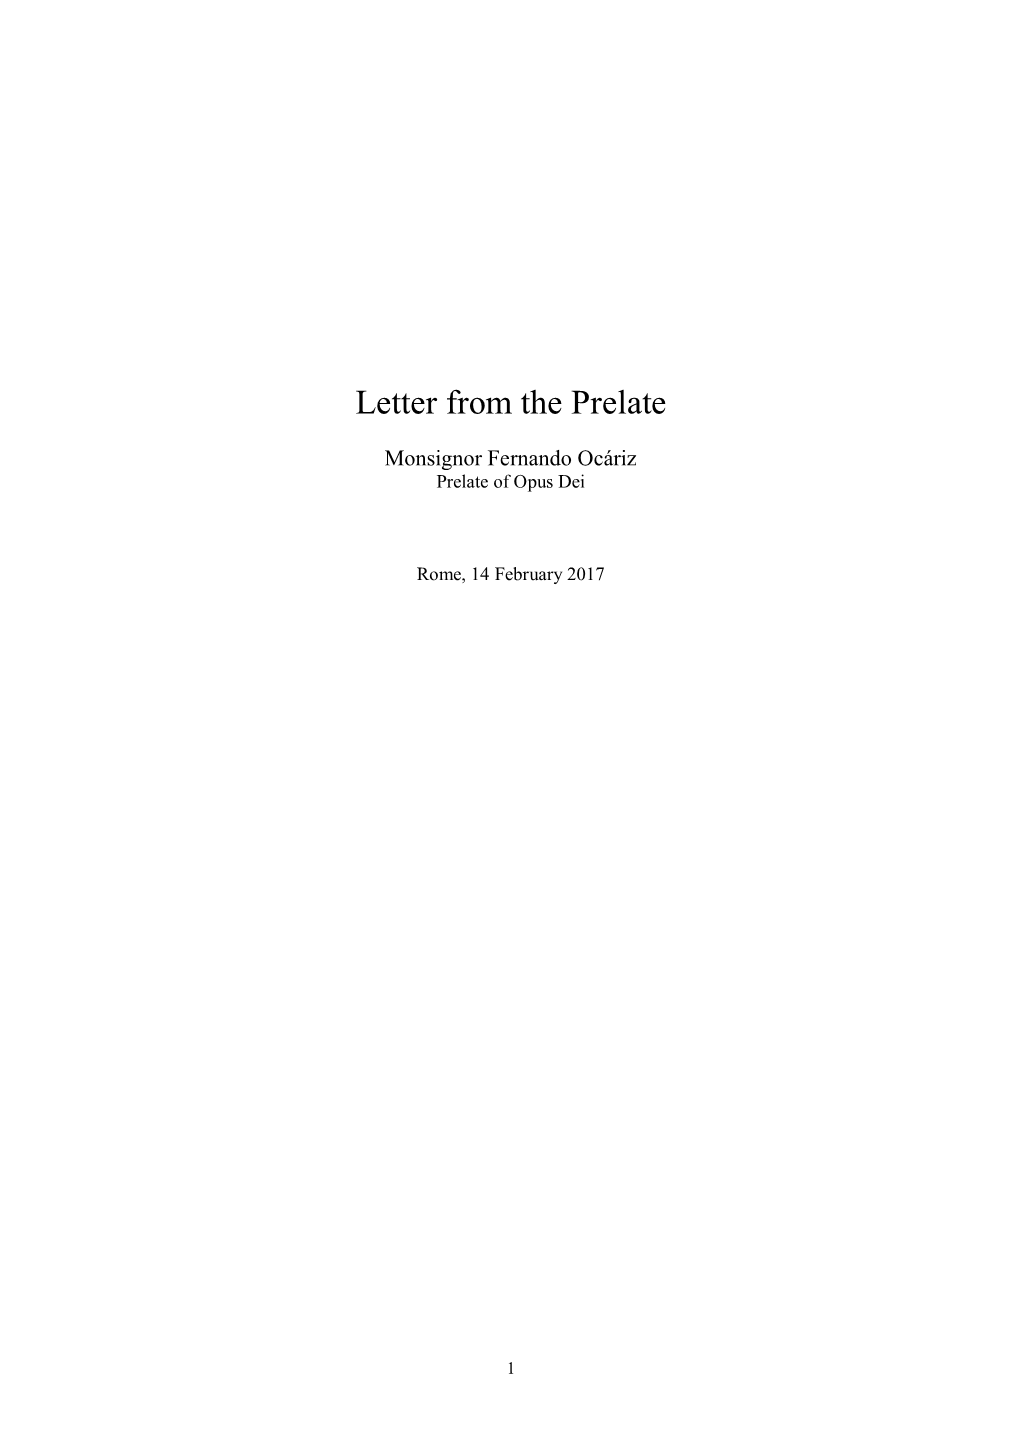 Letter from the Prelate (February 14, 2017)